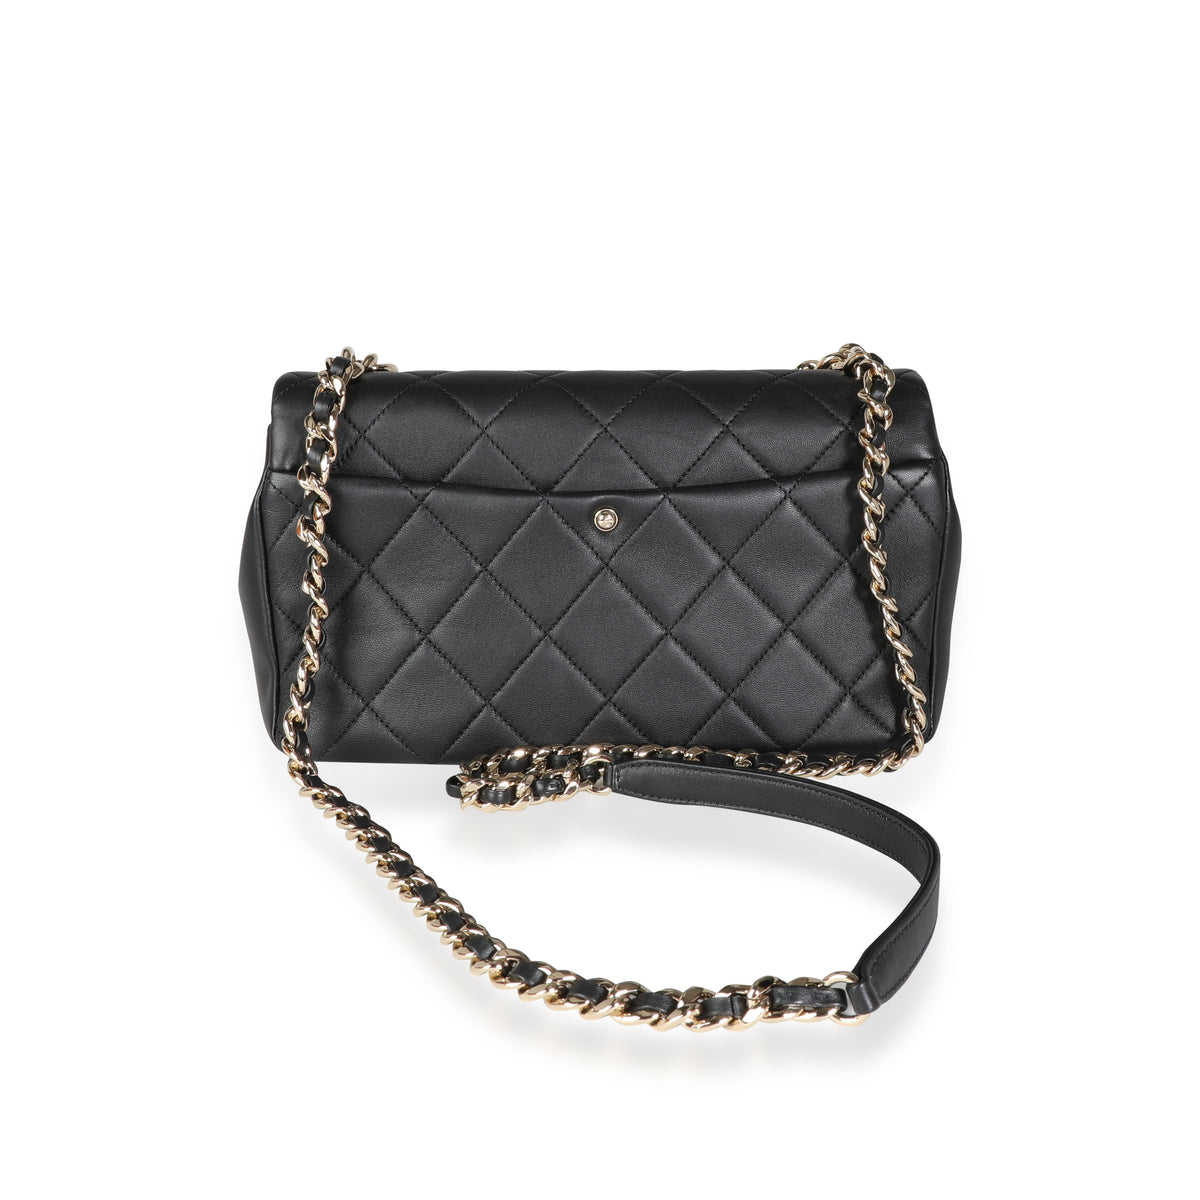 Pre-owned Chanel Black Lambskin Lucky Charm Limited Quilted Flap Bag Medium  Size